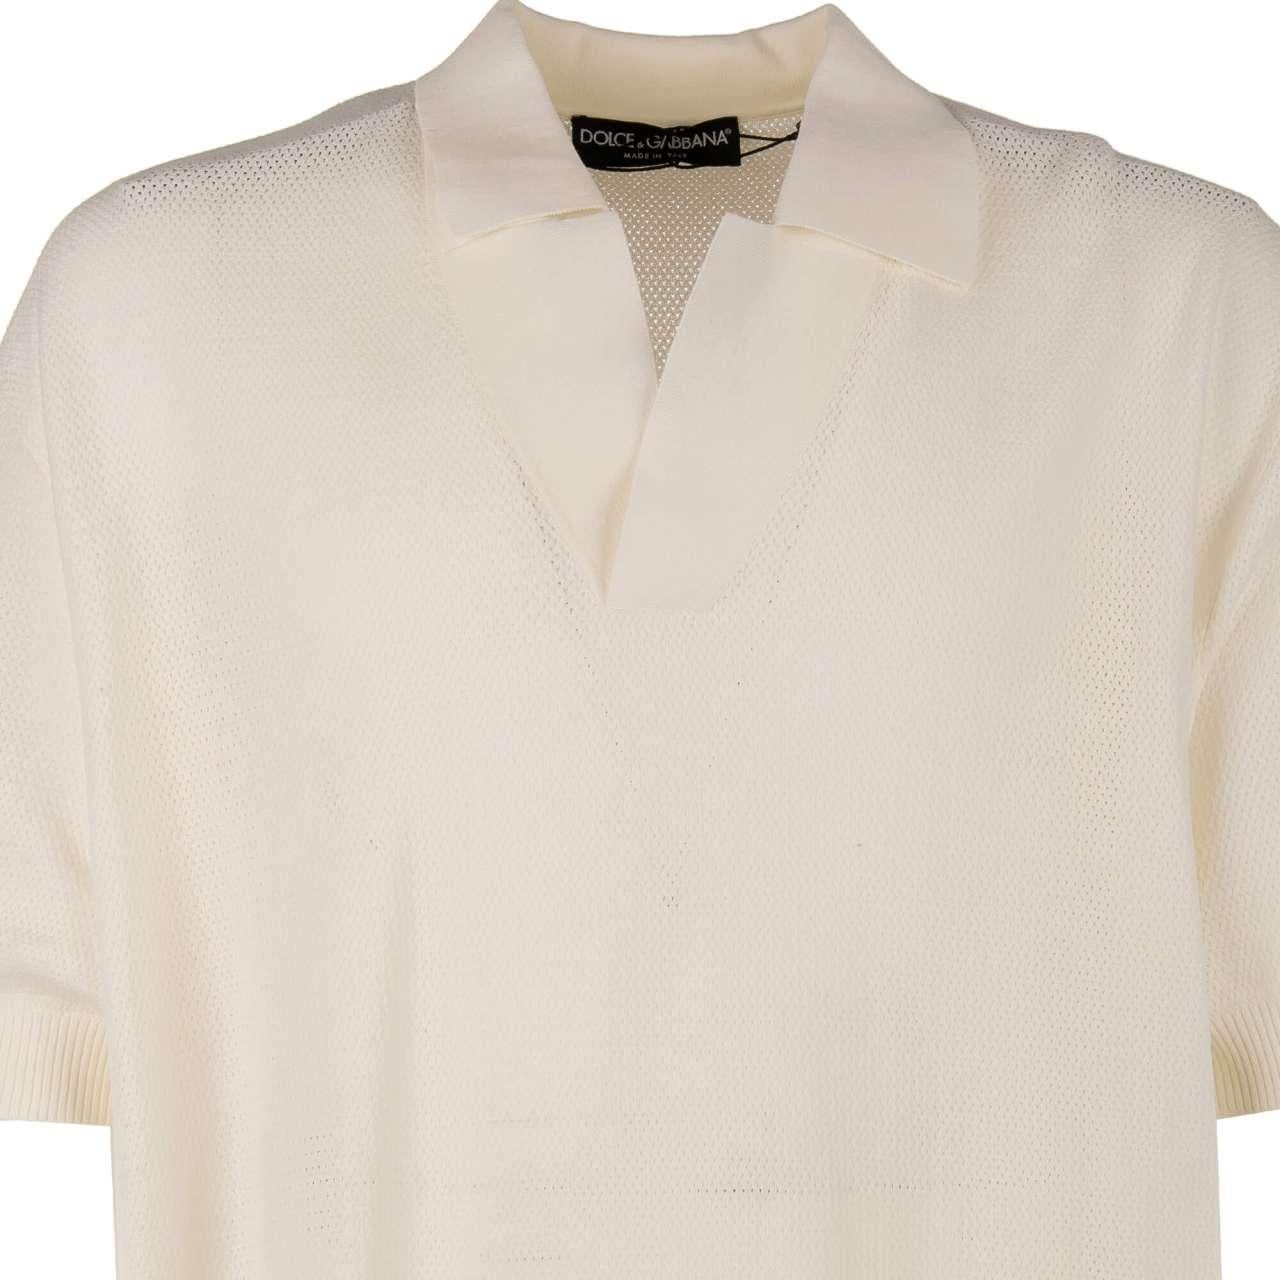 - Cotton Polo Shirt with structured light fabric in white by DOLCE & GABBANA - New with Tags - MADE IN ITALY - Regular F- Polo collar - No closure - Model: GX635T-JACDO-W0001 - Material: 100% Cotton - Color: White